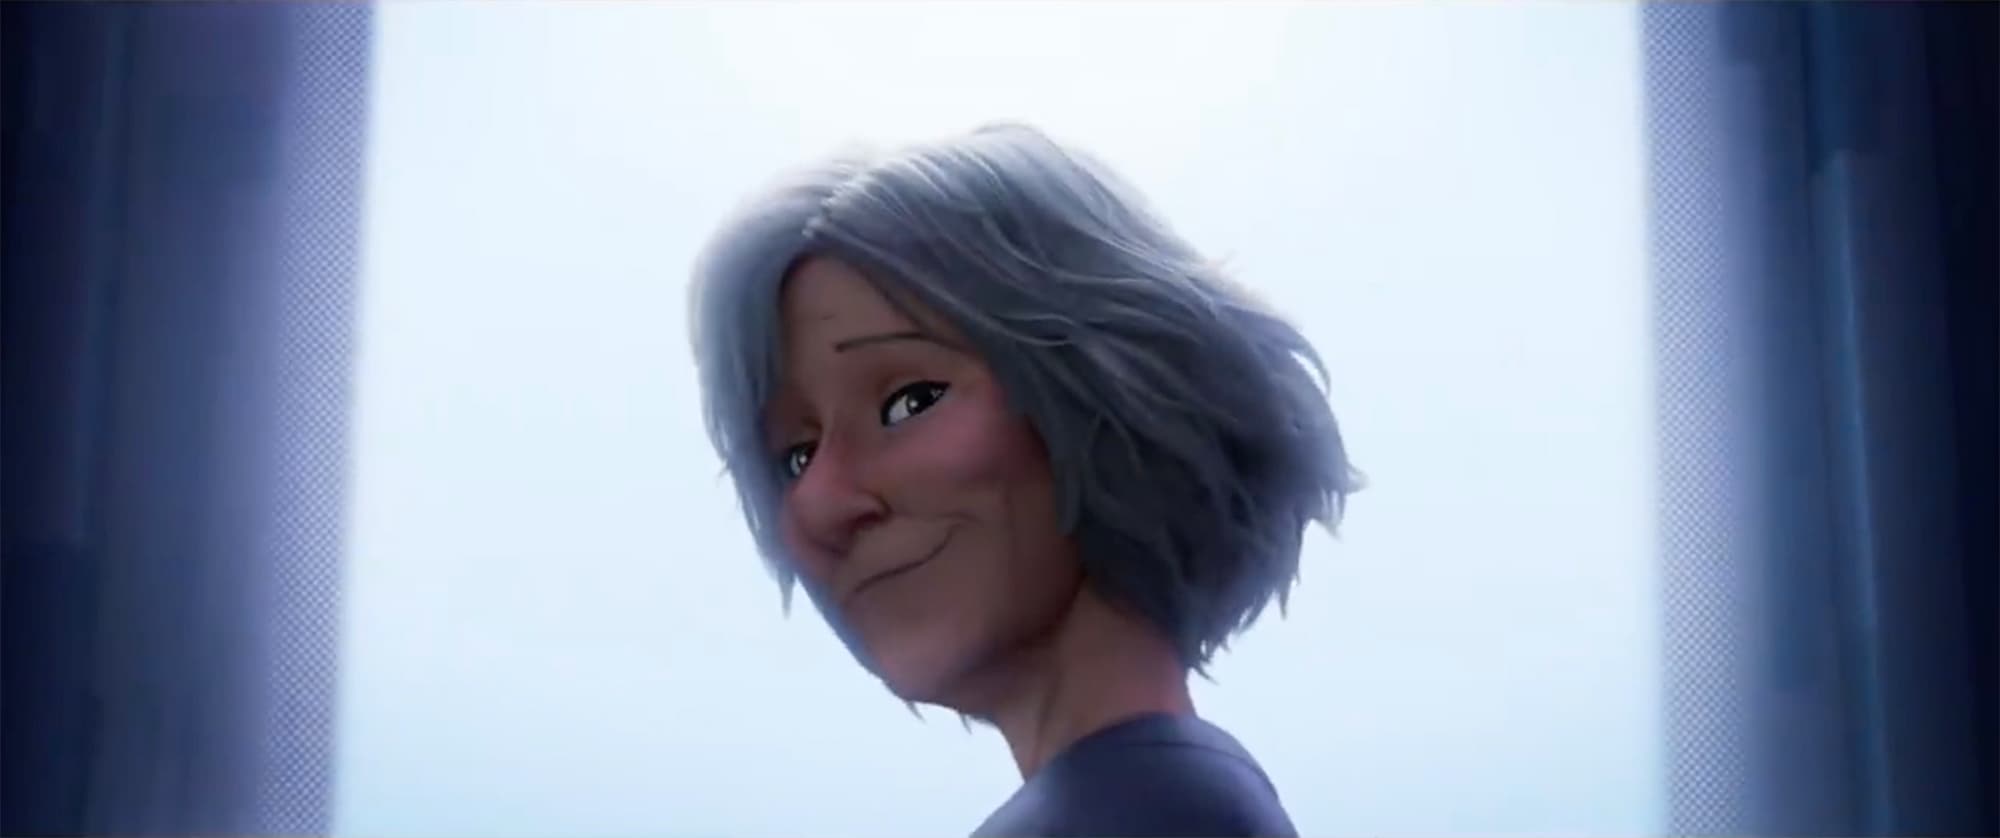 Aunt May in "Spider-Man: Into the Spider-Verse"